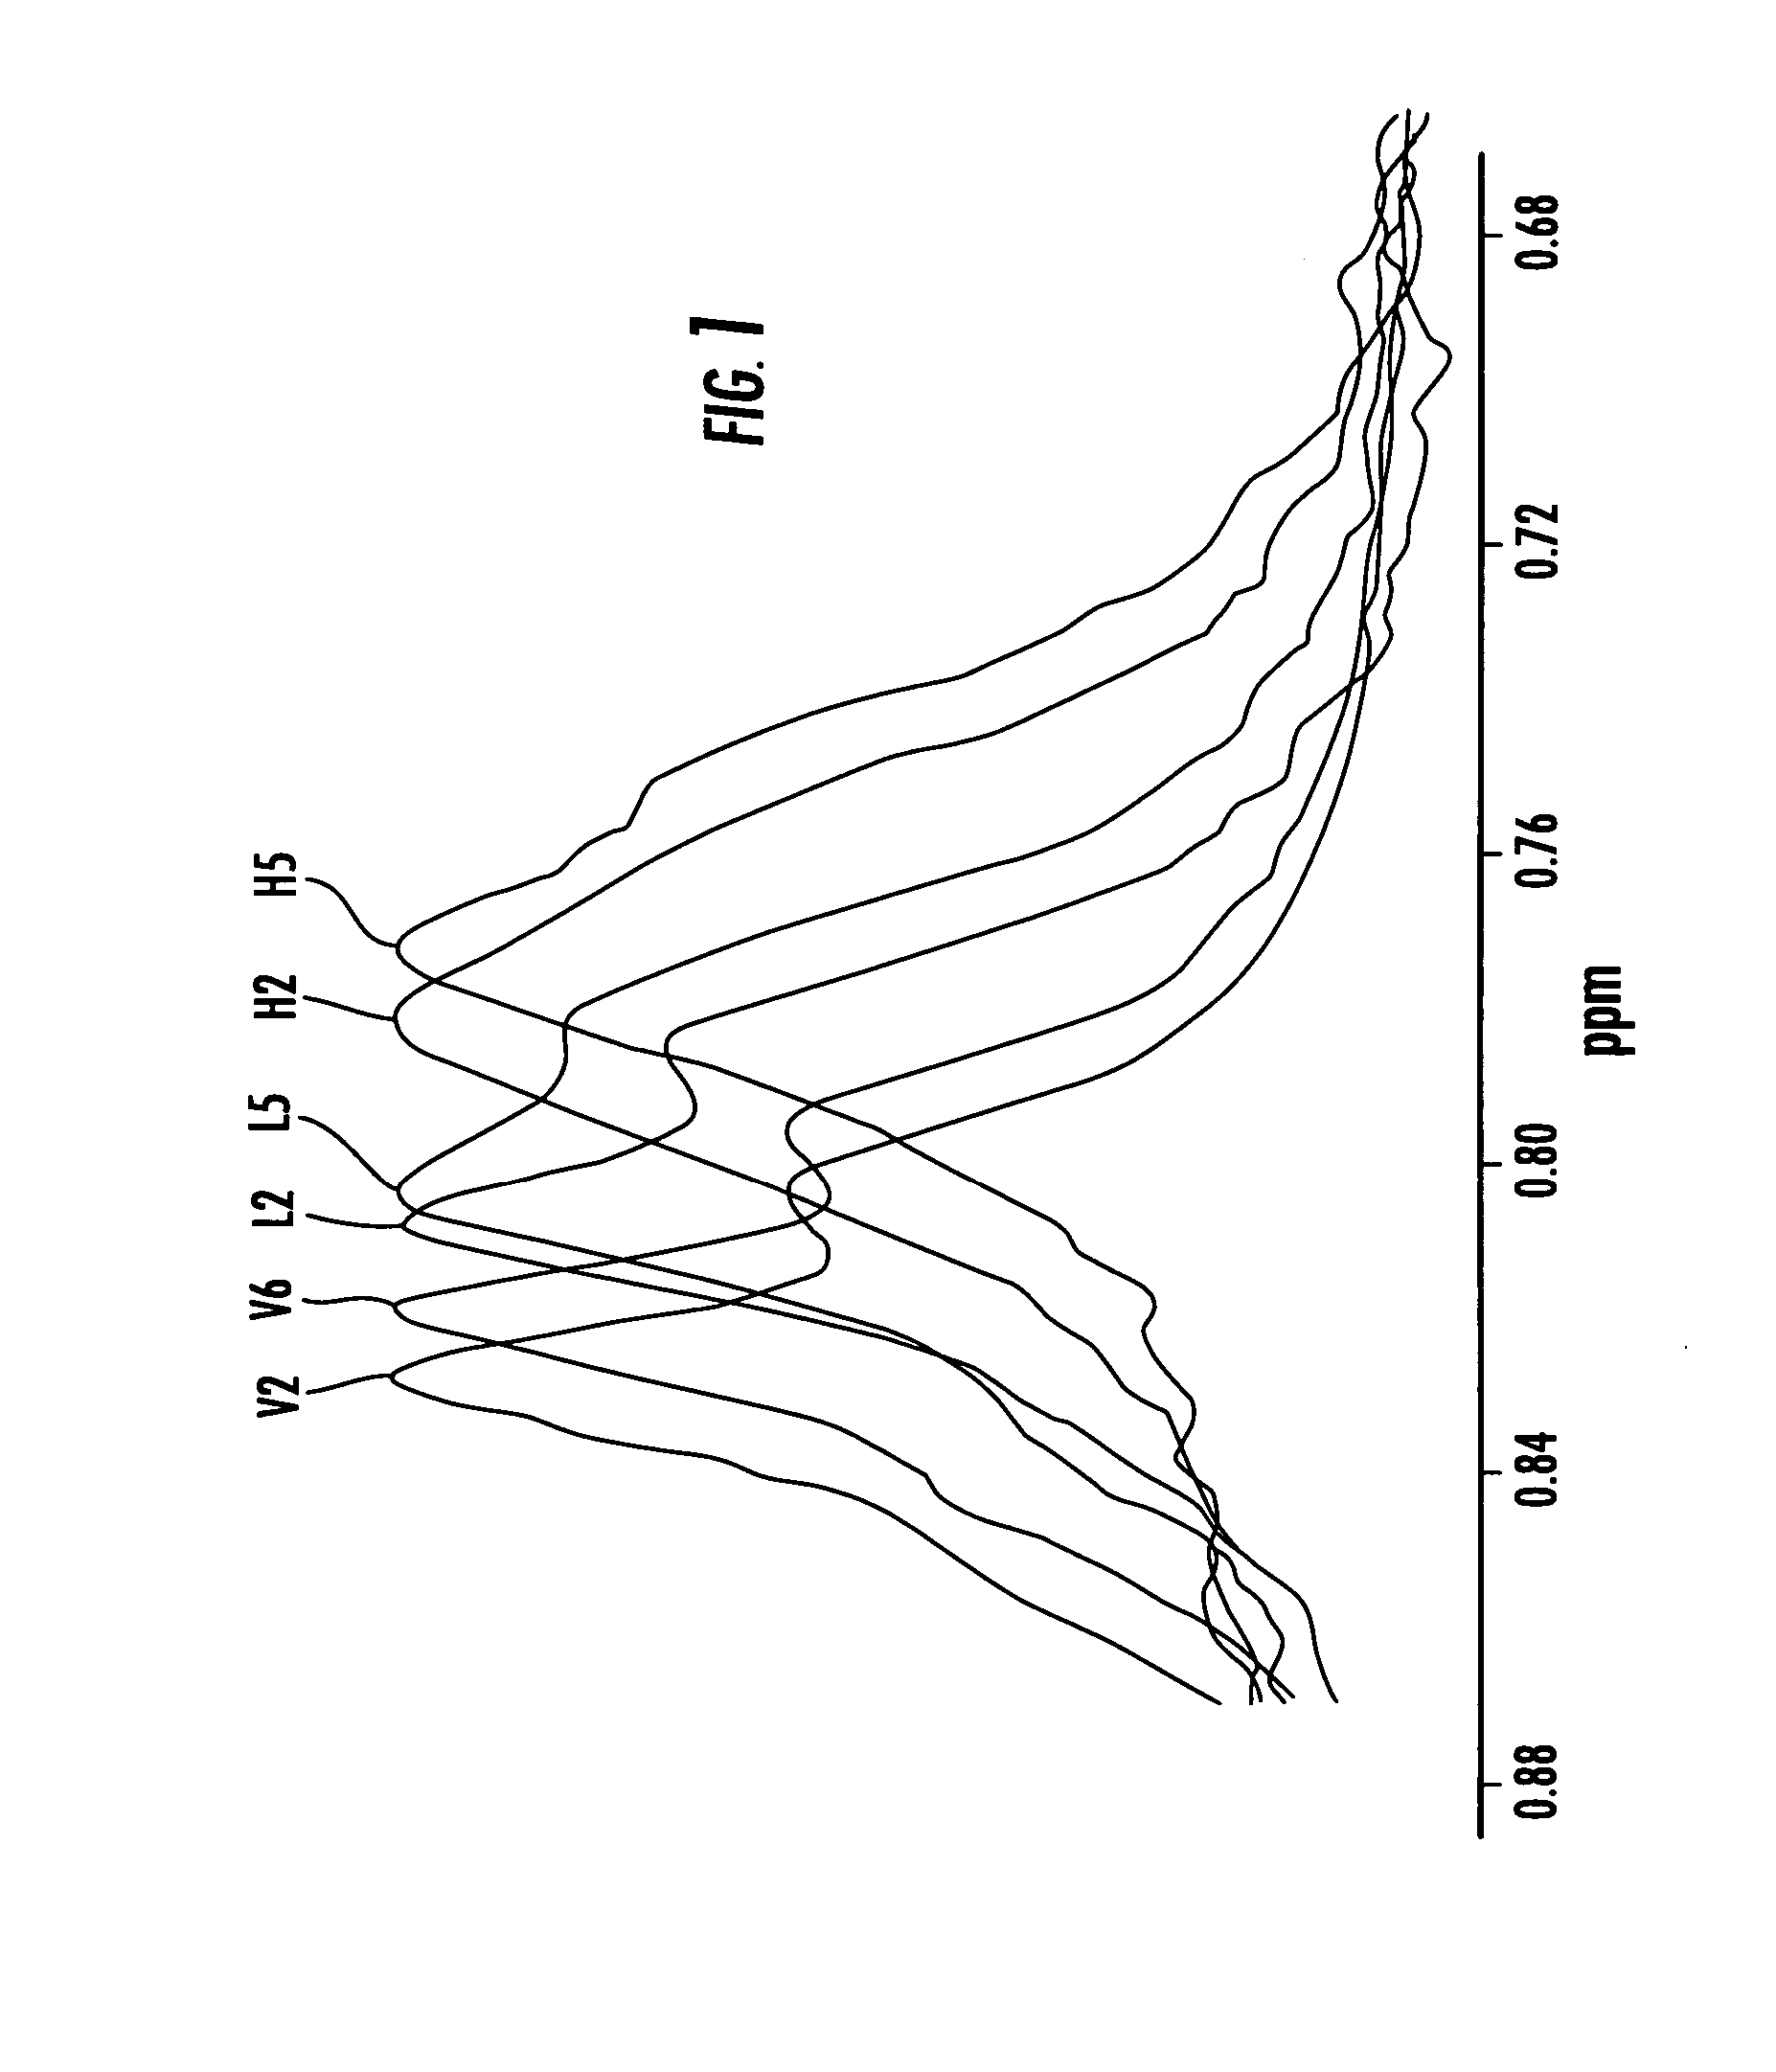 NMR clinical analyzers and related methods, systems, modules and computer program products for clinical evaluation of biosamples